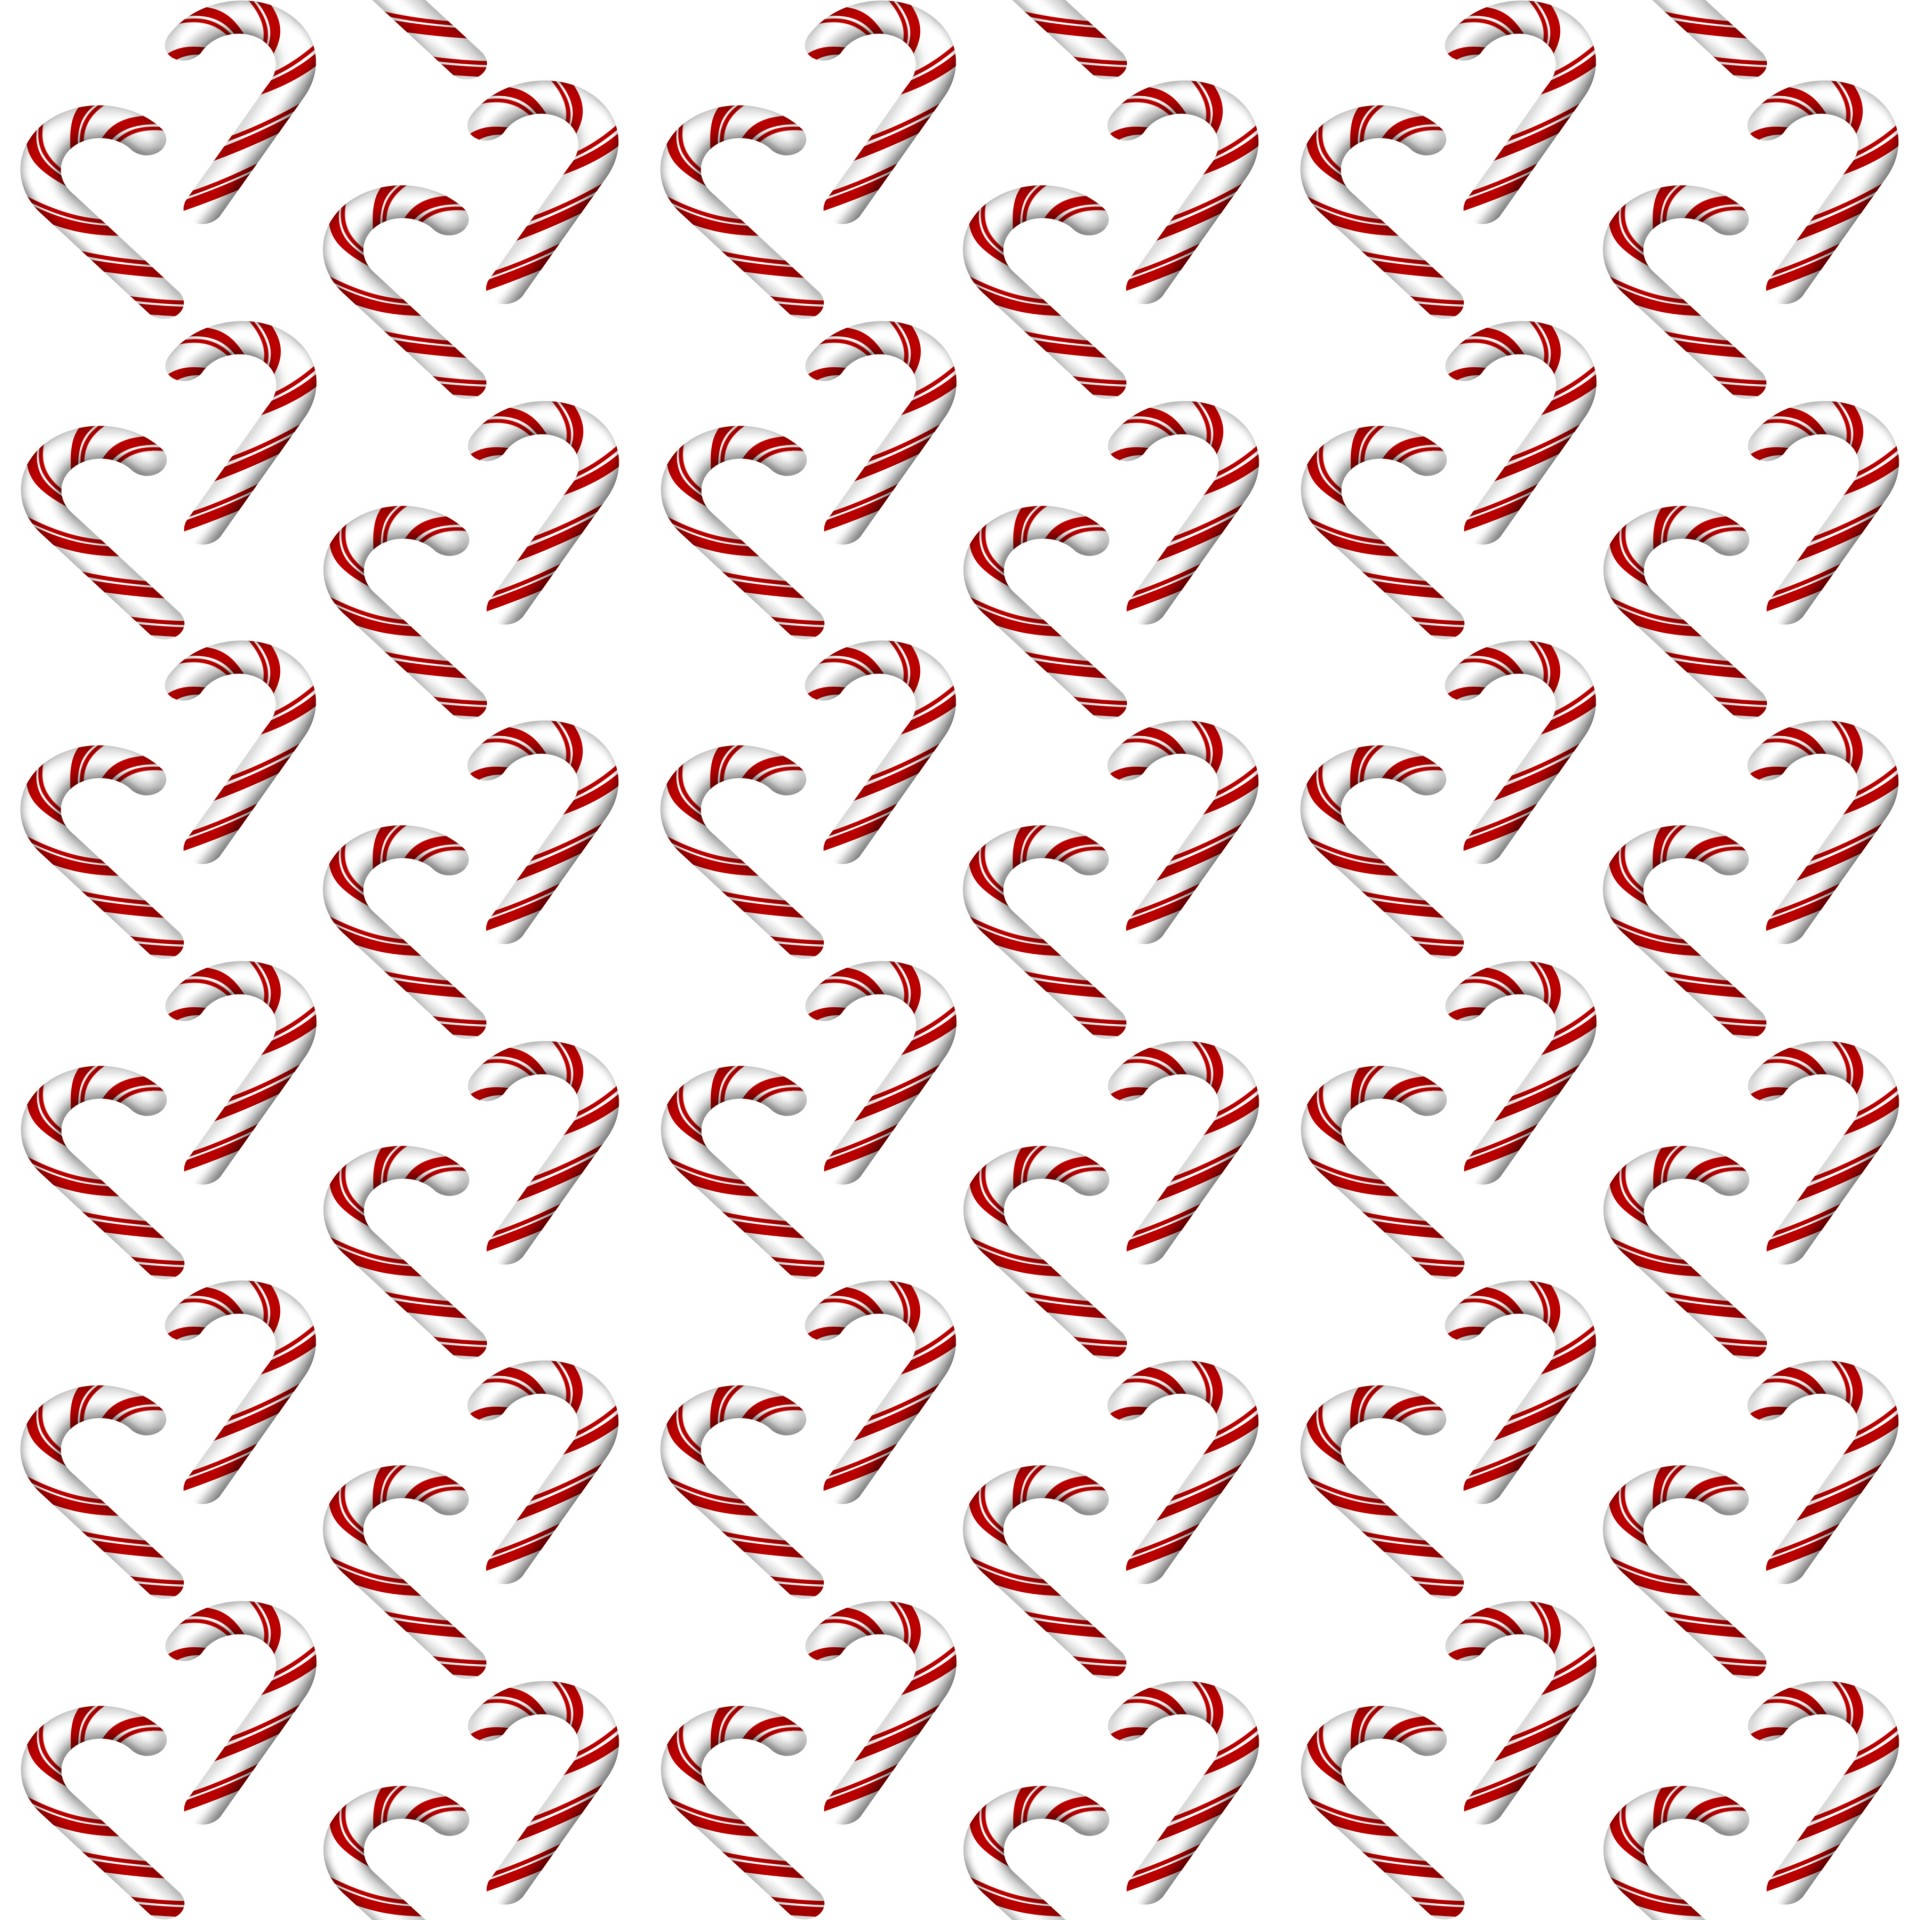 Candy Cane Seamless Pattern Background